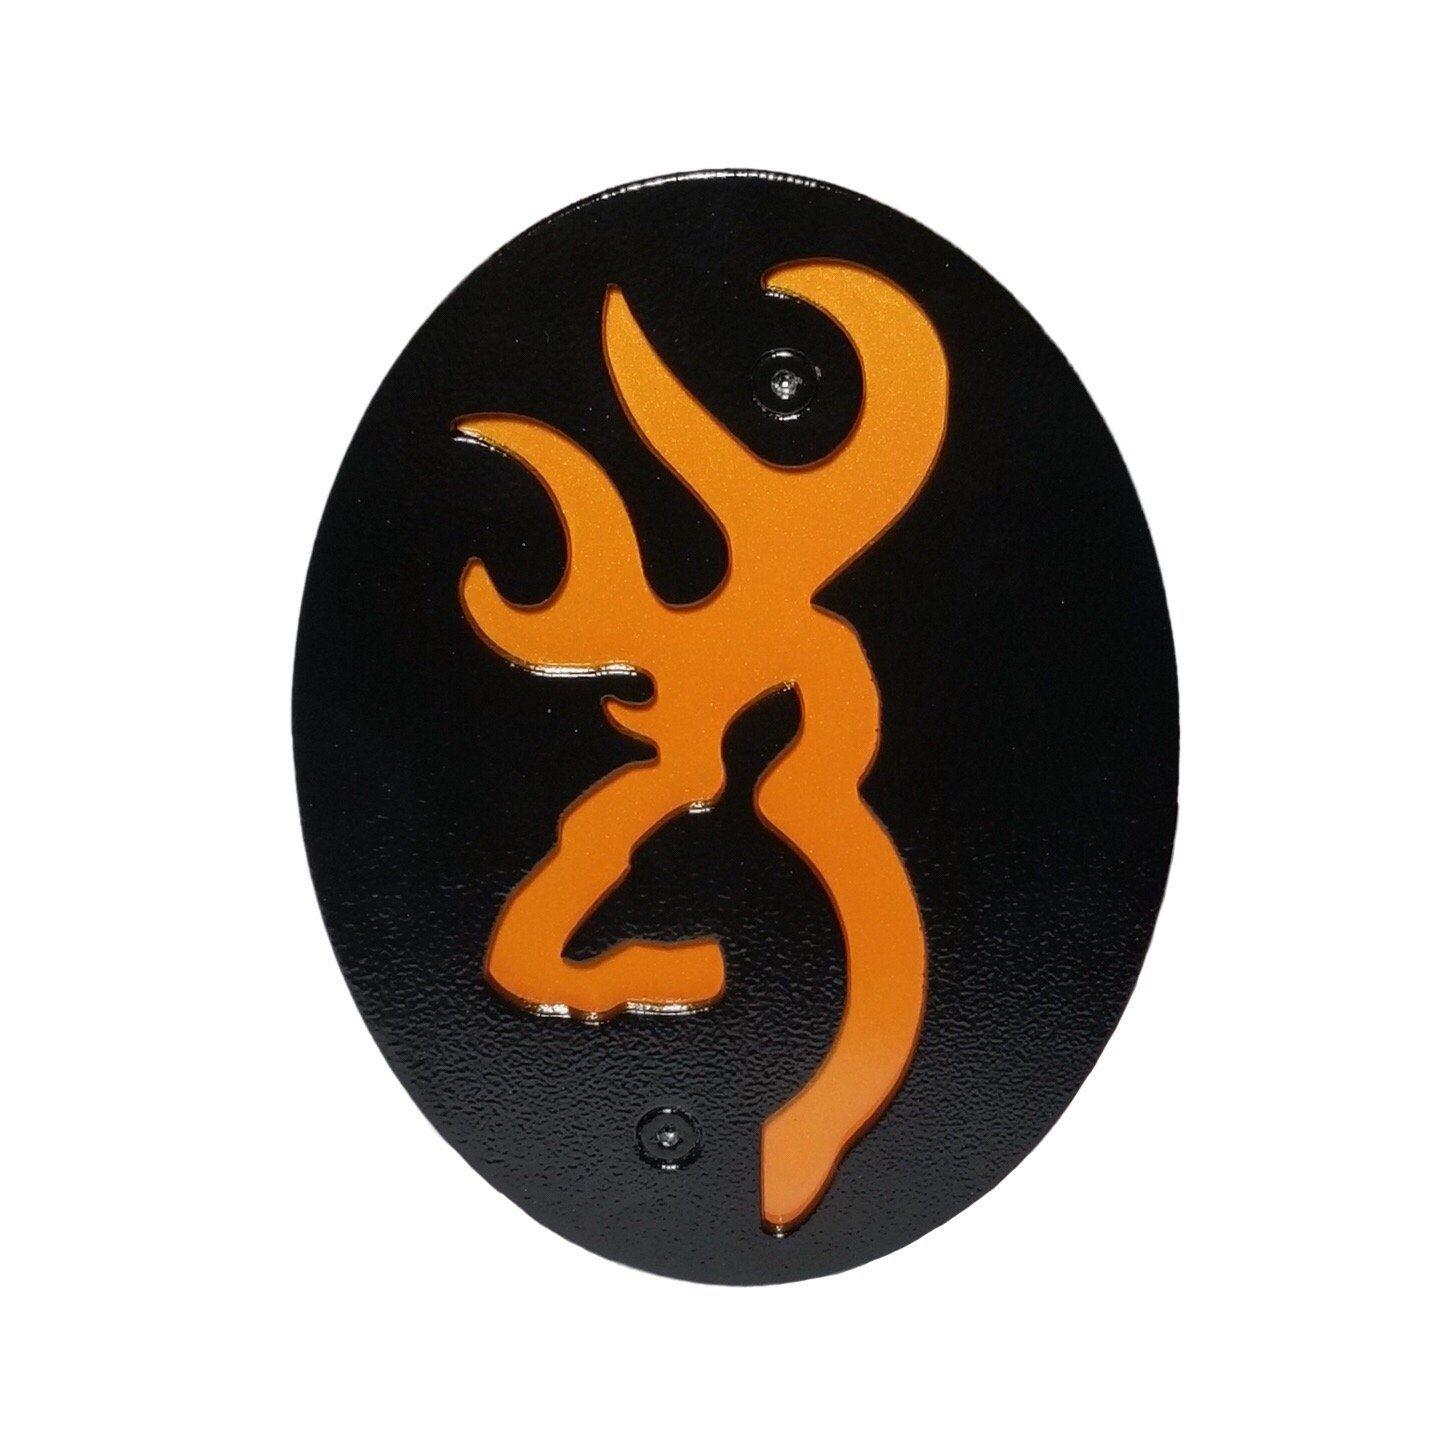 Orange Browning Logo - Amazon.com: Browning Logos Hitch Cover (Black Texture & Safety ...